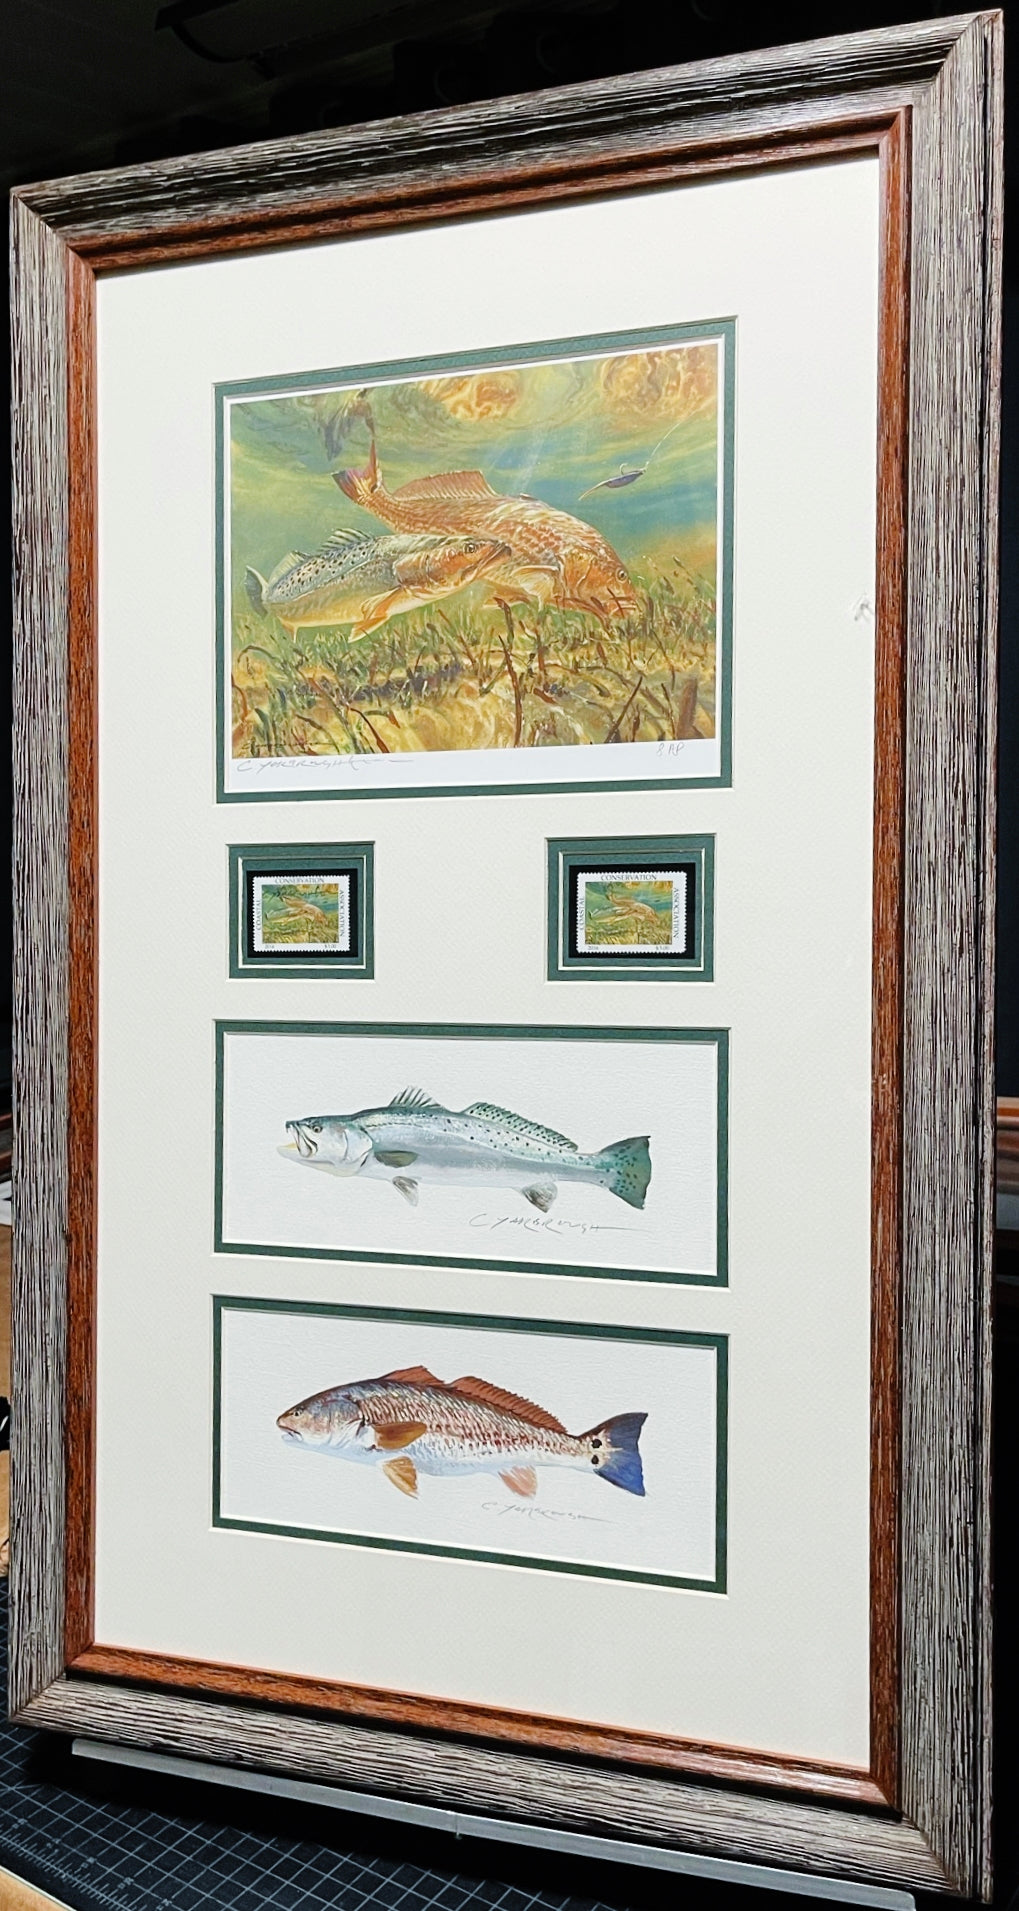 Chance Yarbrough - 2016 Coastal Conservation Association CCA Stamp Print Artist Proof With Double Stamps - 2 Beautiful 6